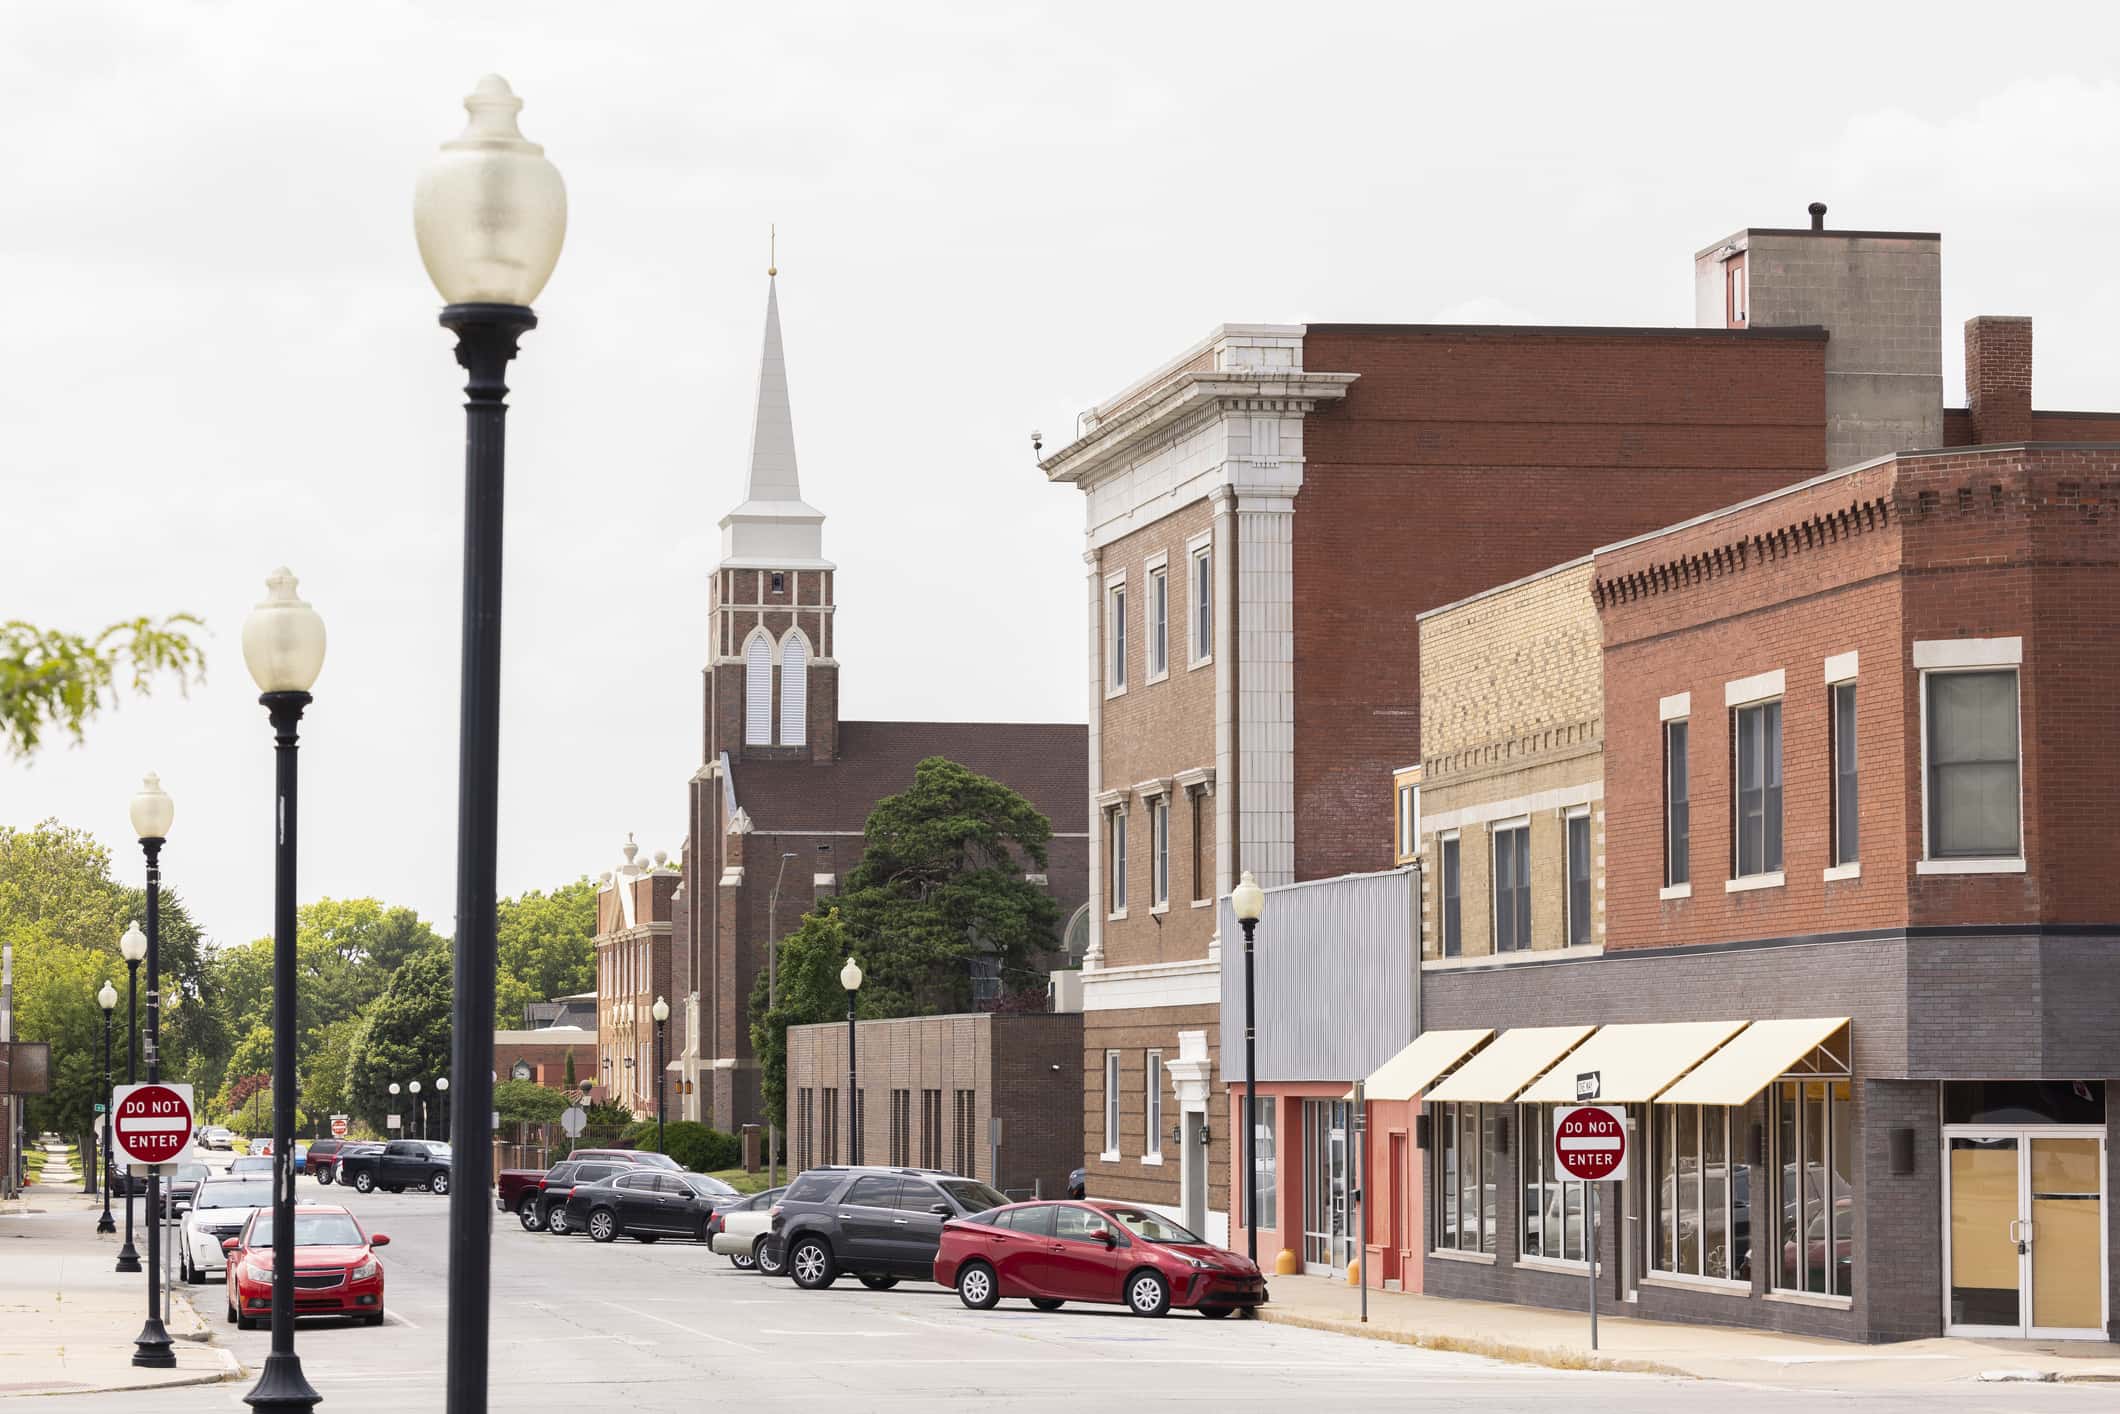 On a cloudy day, the streets of Independence, Missouri, sit quietly among the small town buildings, light poles, and street signs.